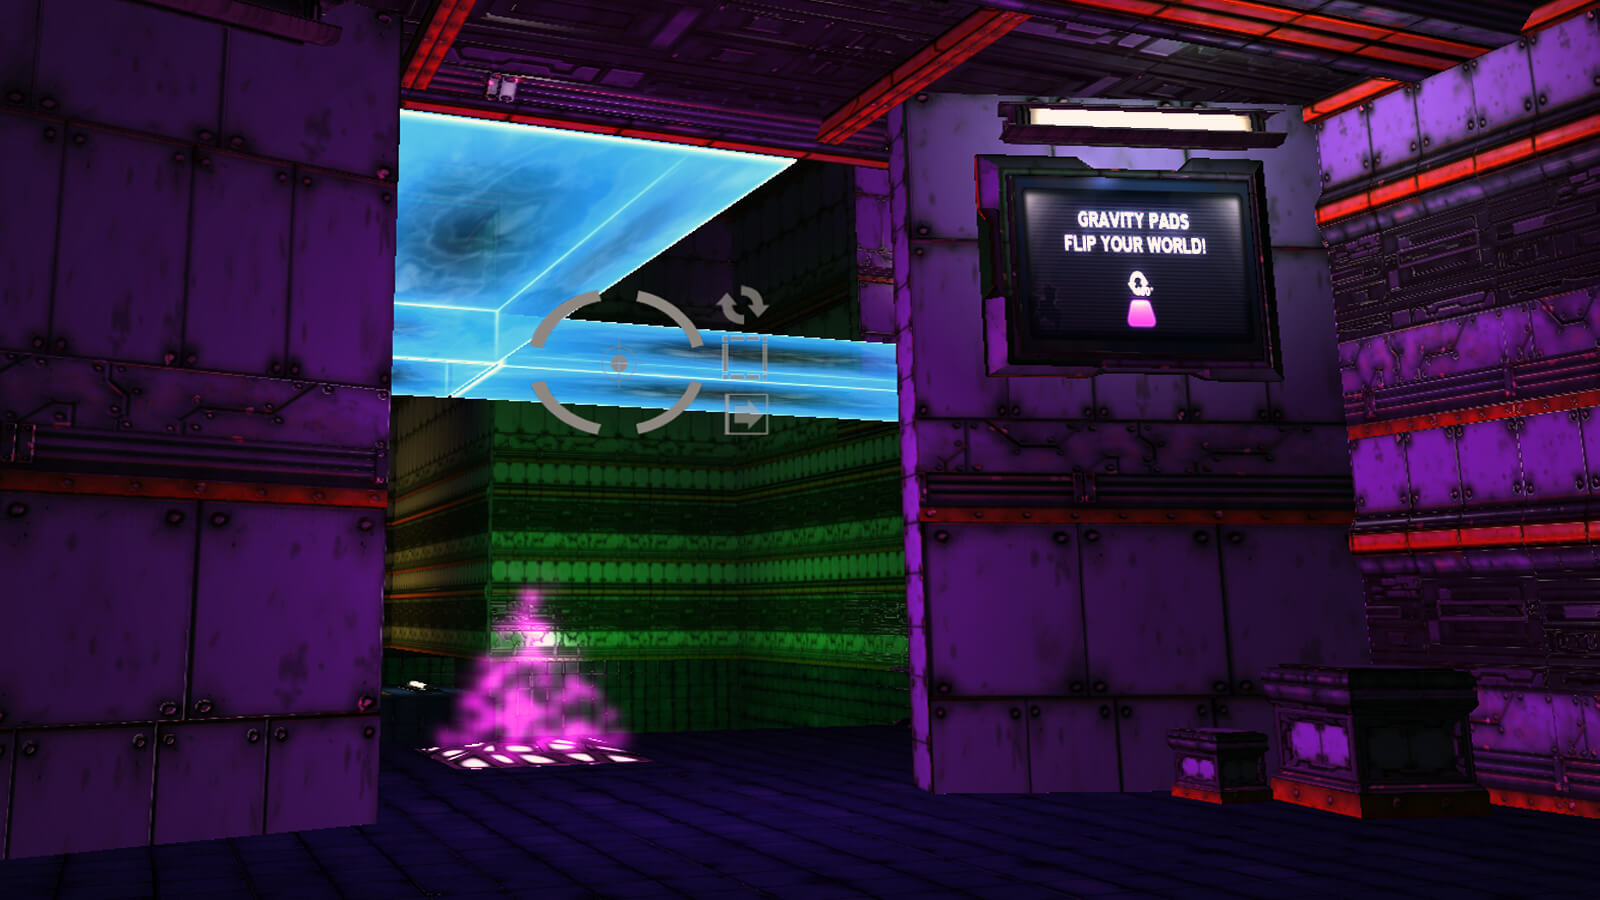 A purple room with a sign that reads "gravity pads flip your world!" 